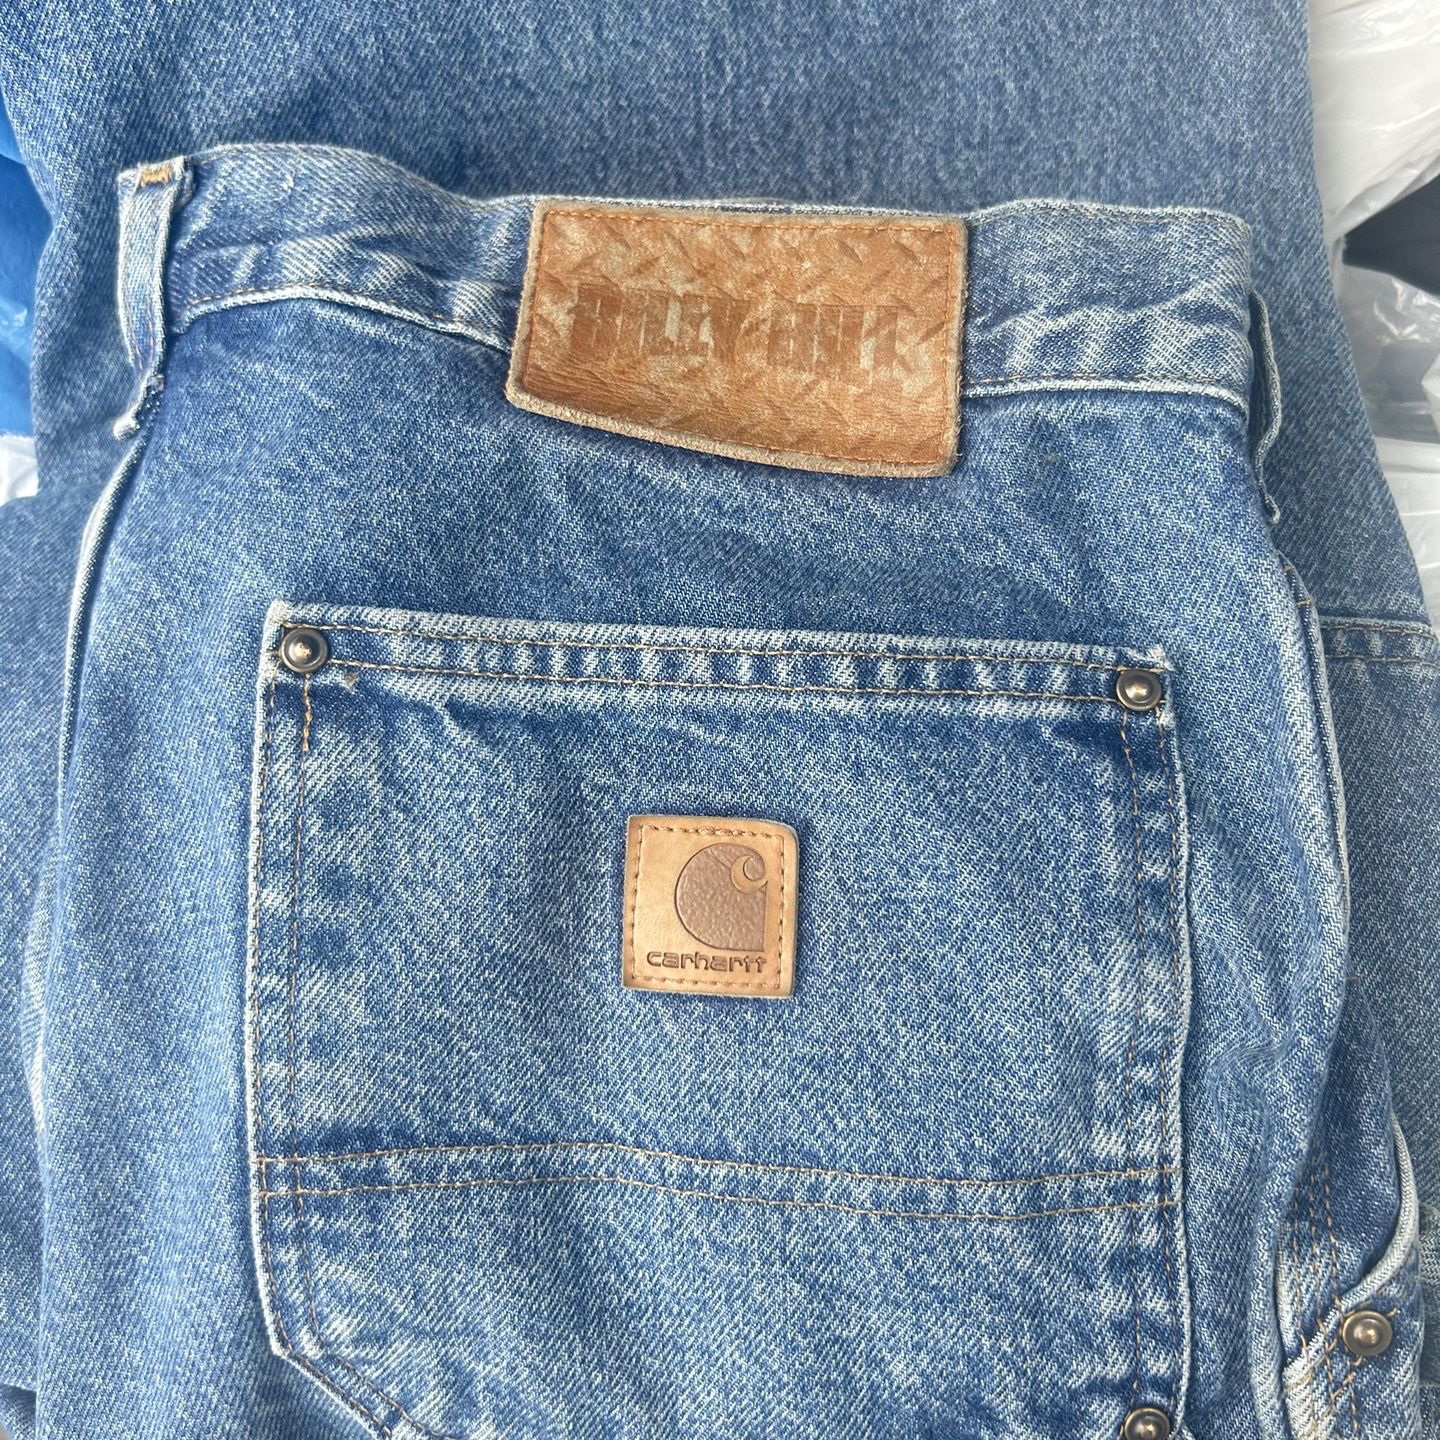 Louis Vuitton supreme denim collection for Sale in Los Angeles, CA - OfferUp